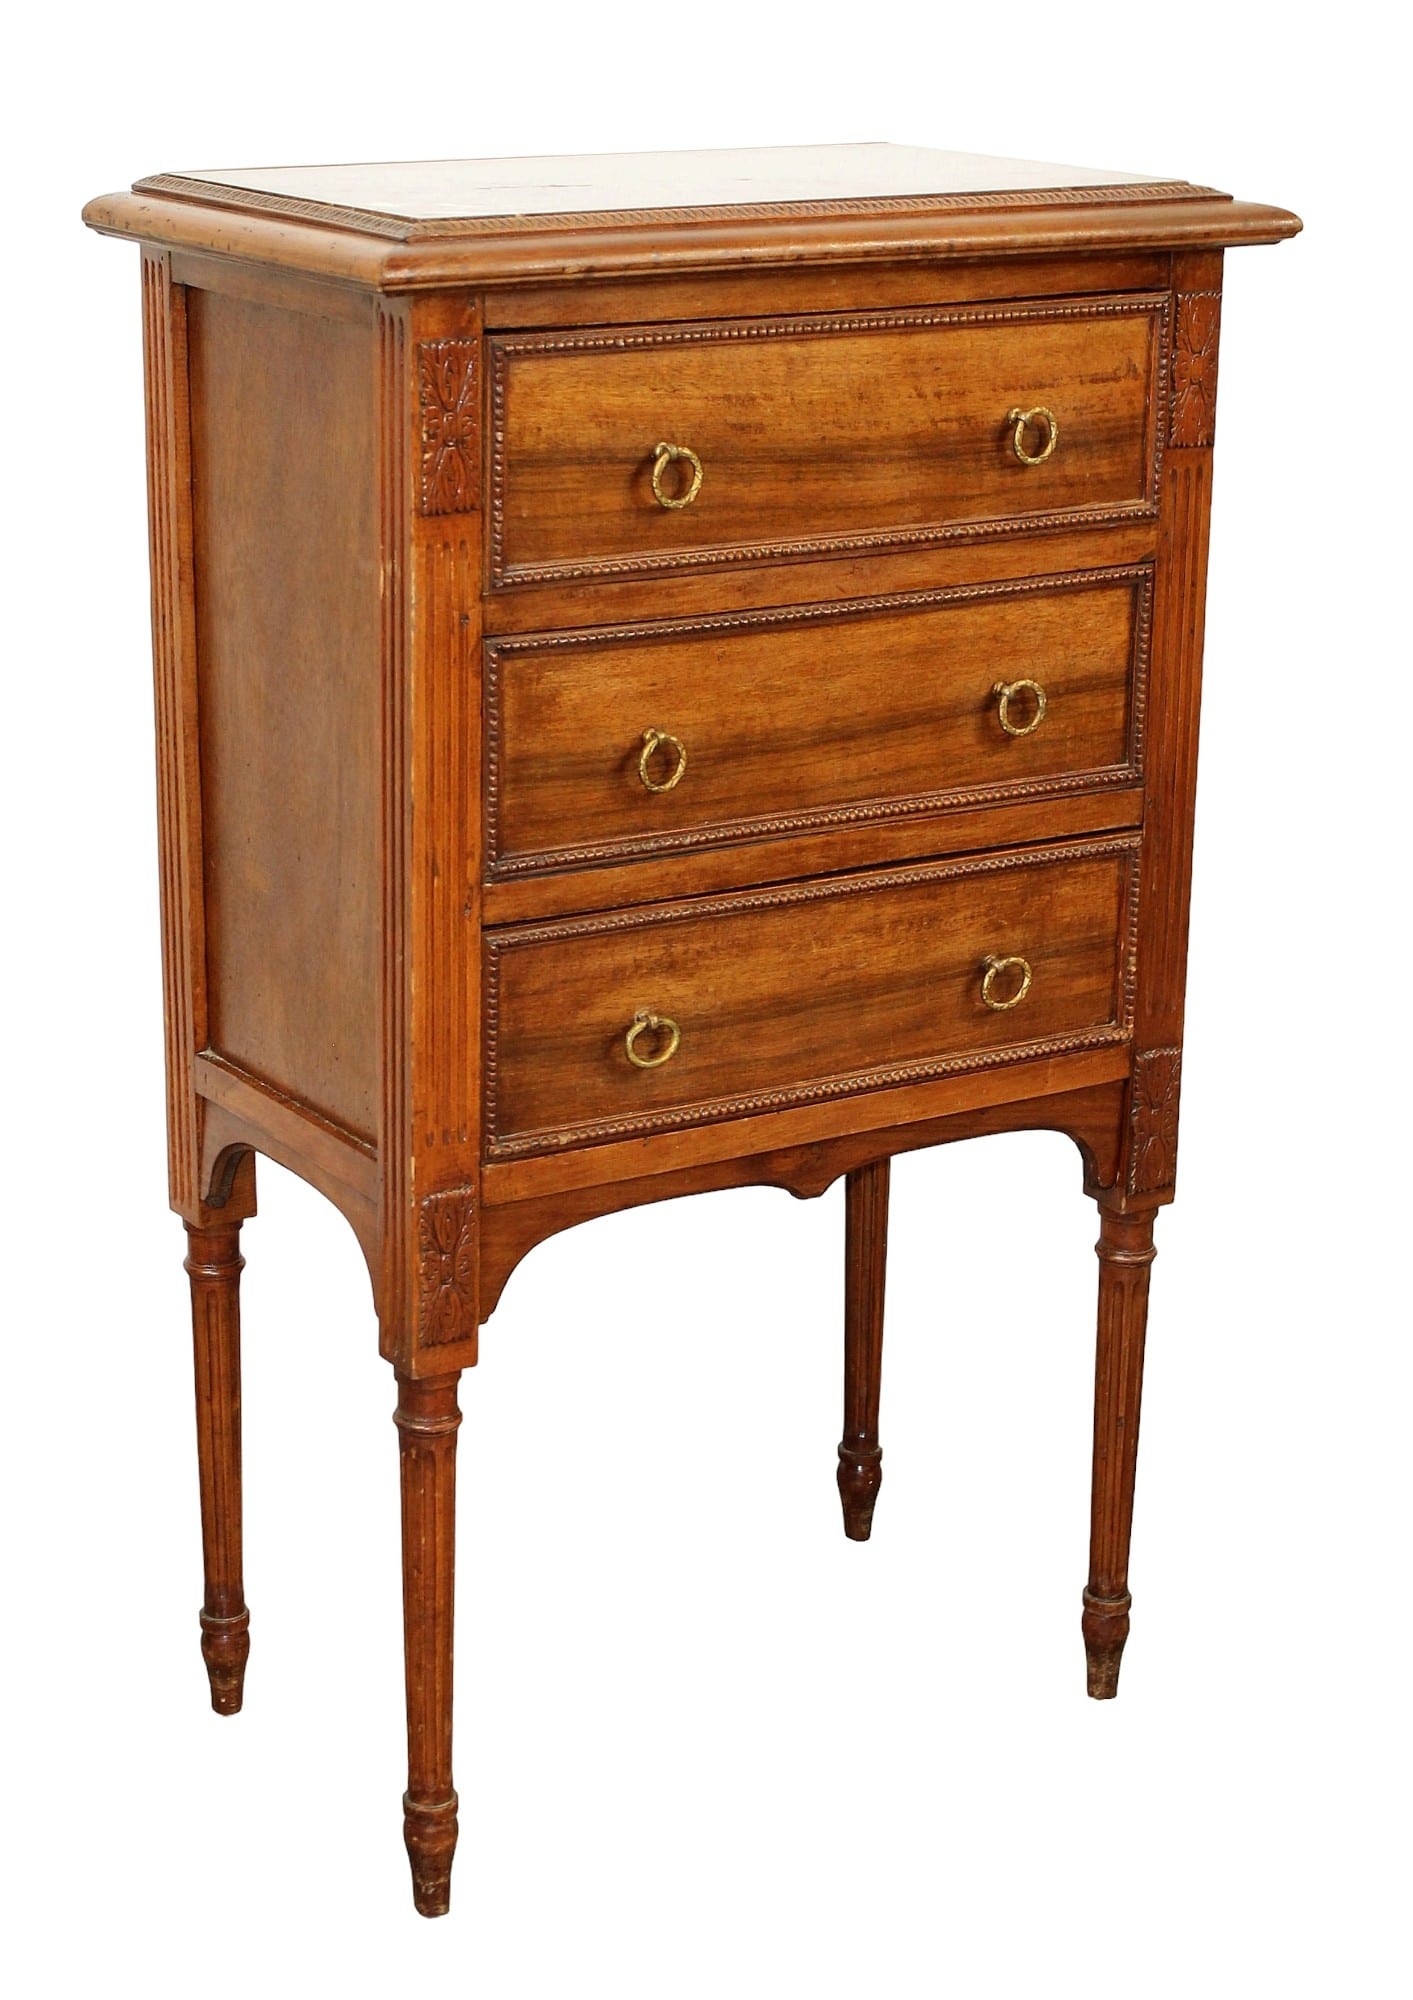 French Louis XVI style petite commode